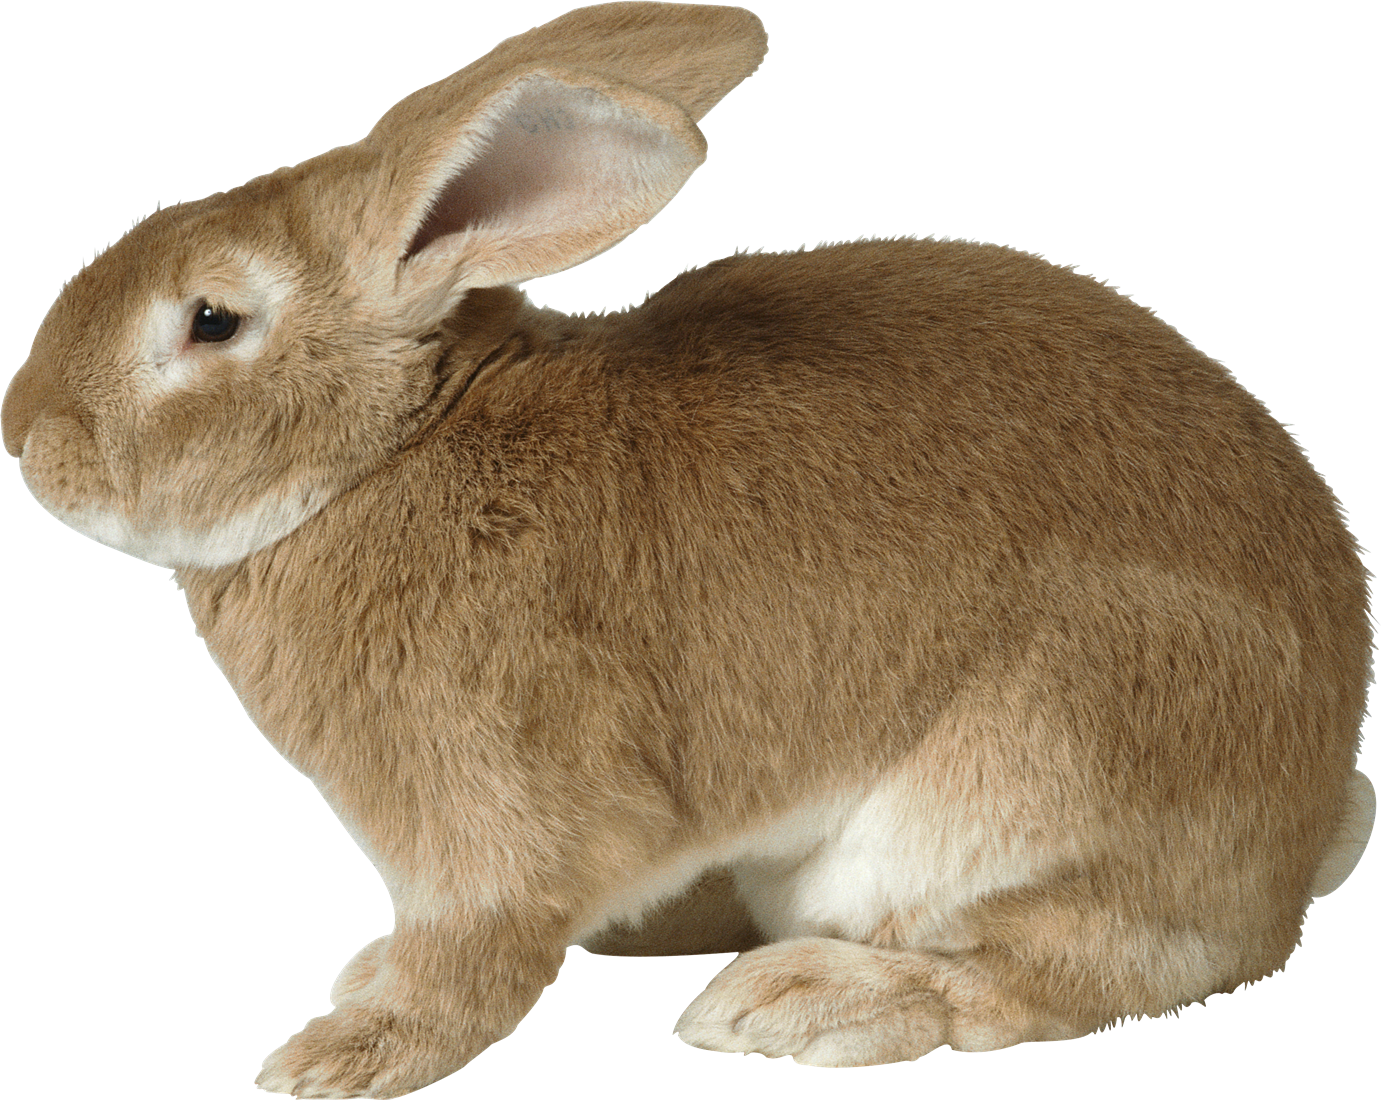 A Rabbit With Long Ears